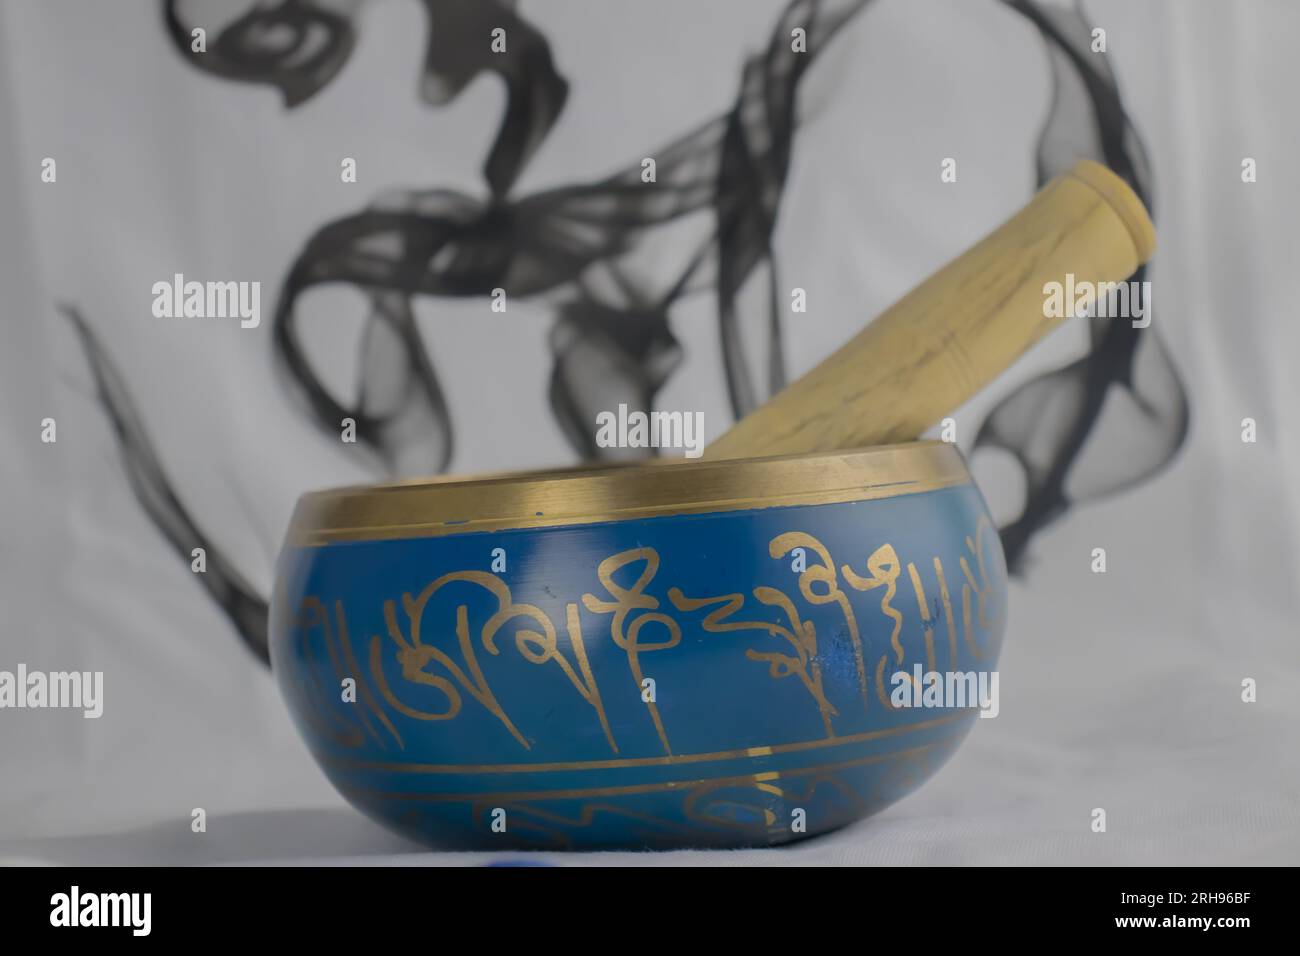 Hand Crafted bronze Singing Bowl painted in Blue and Gold color, often used for meditation, colorful background and OM symbol in background Stock Photo